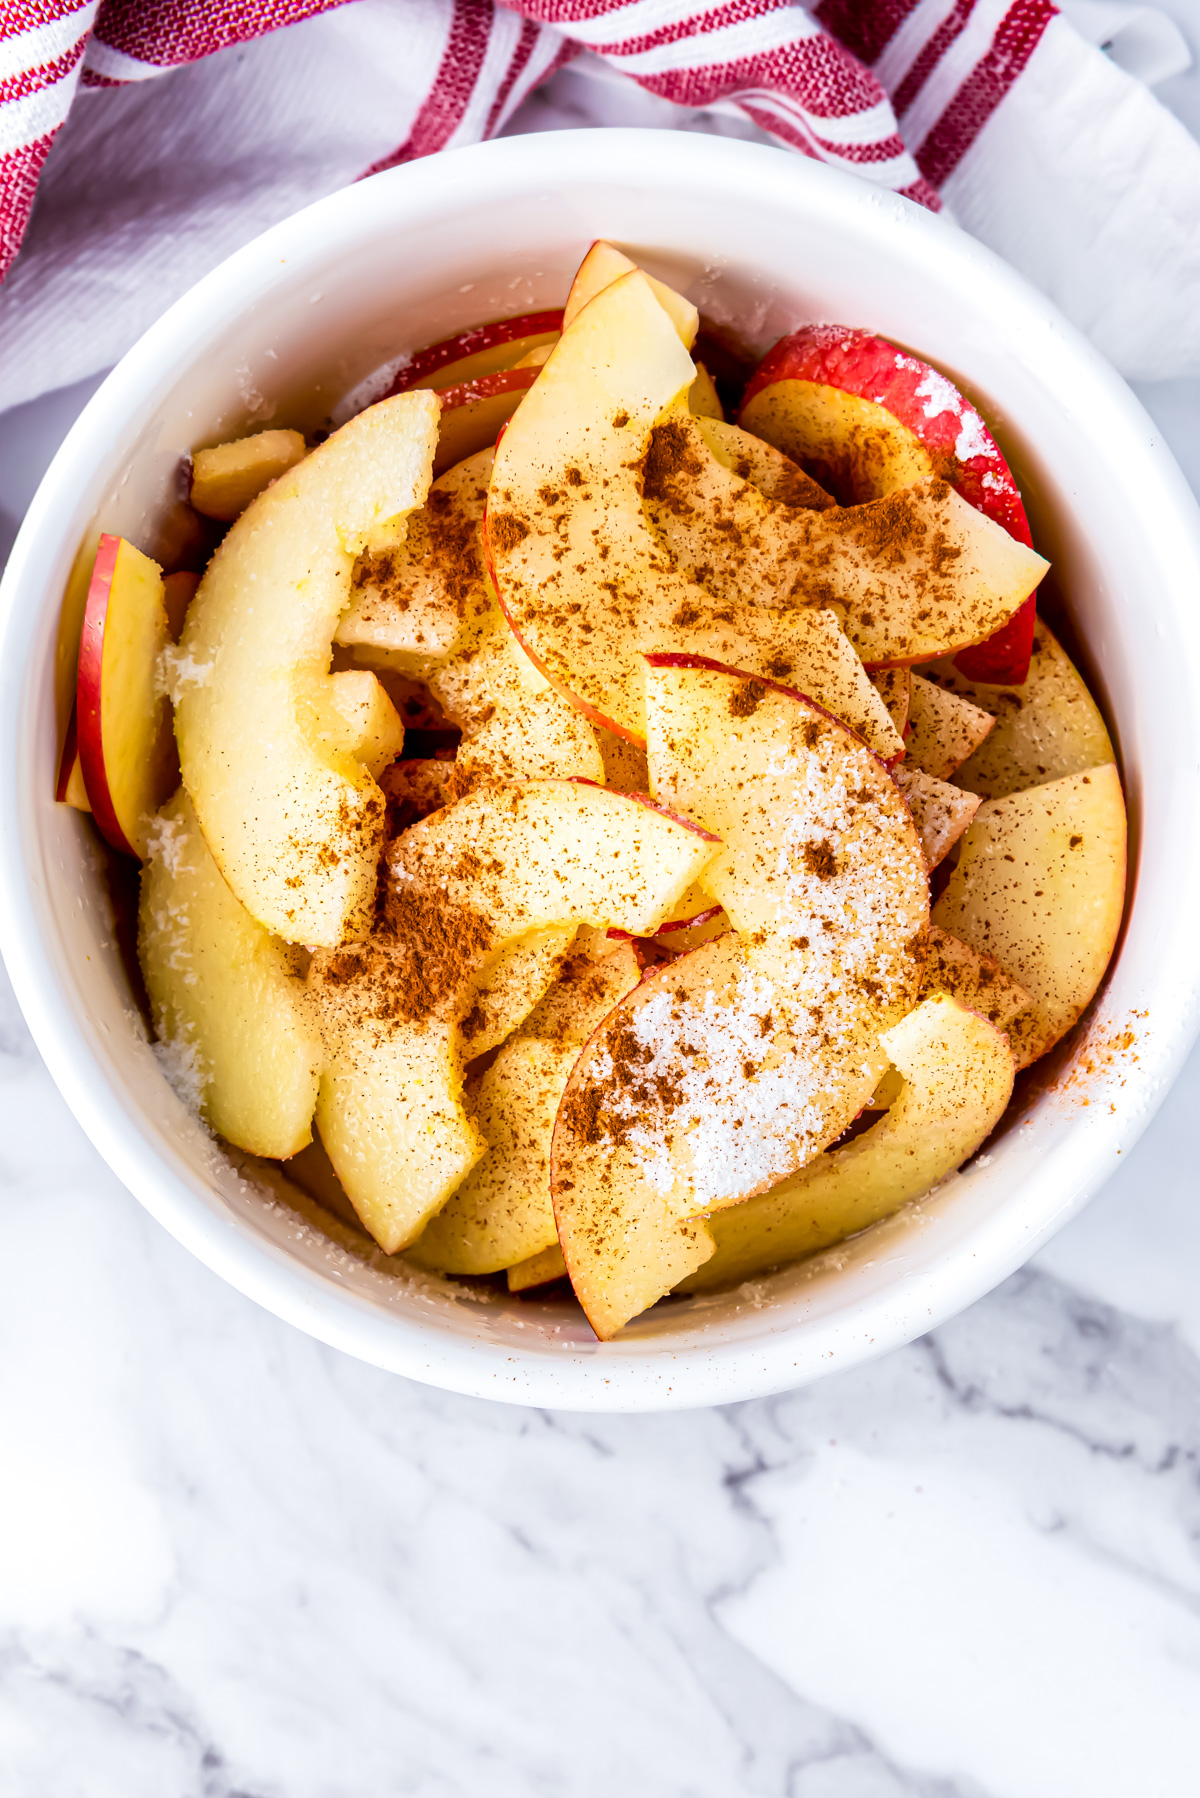 The apple slices in a bowl with the lemon juice and a sprinkling of cinnamon and sugar.